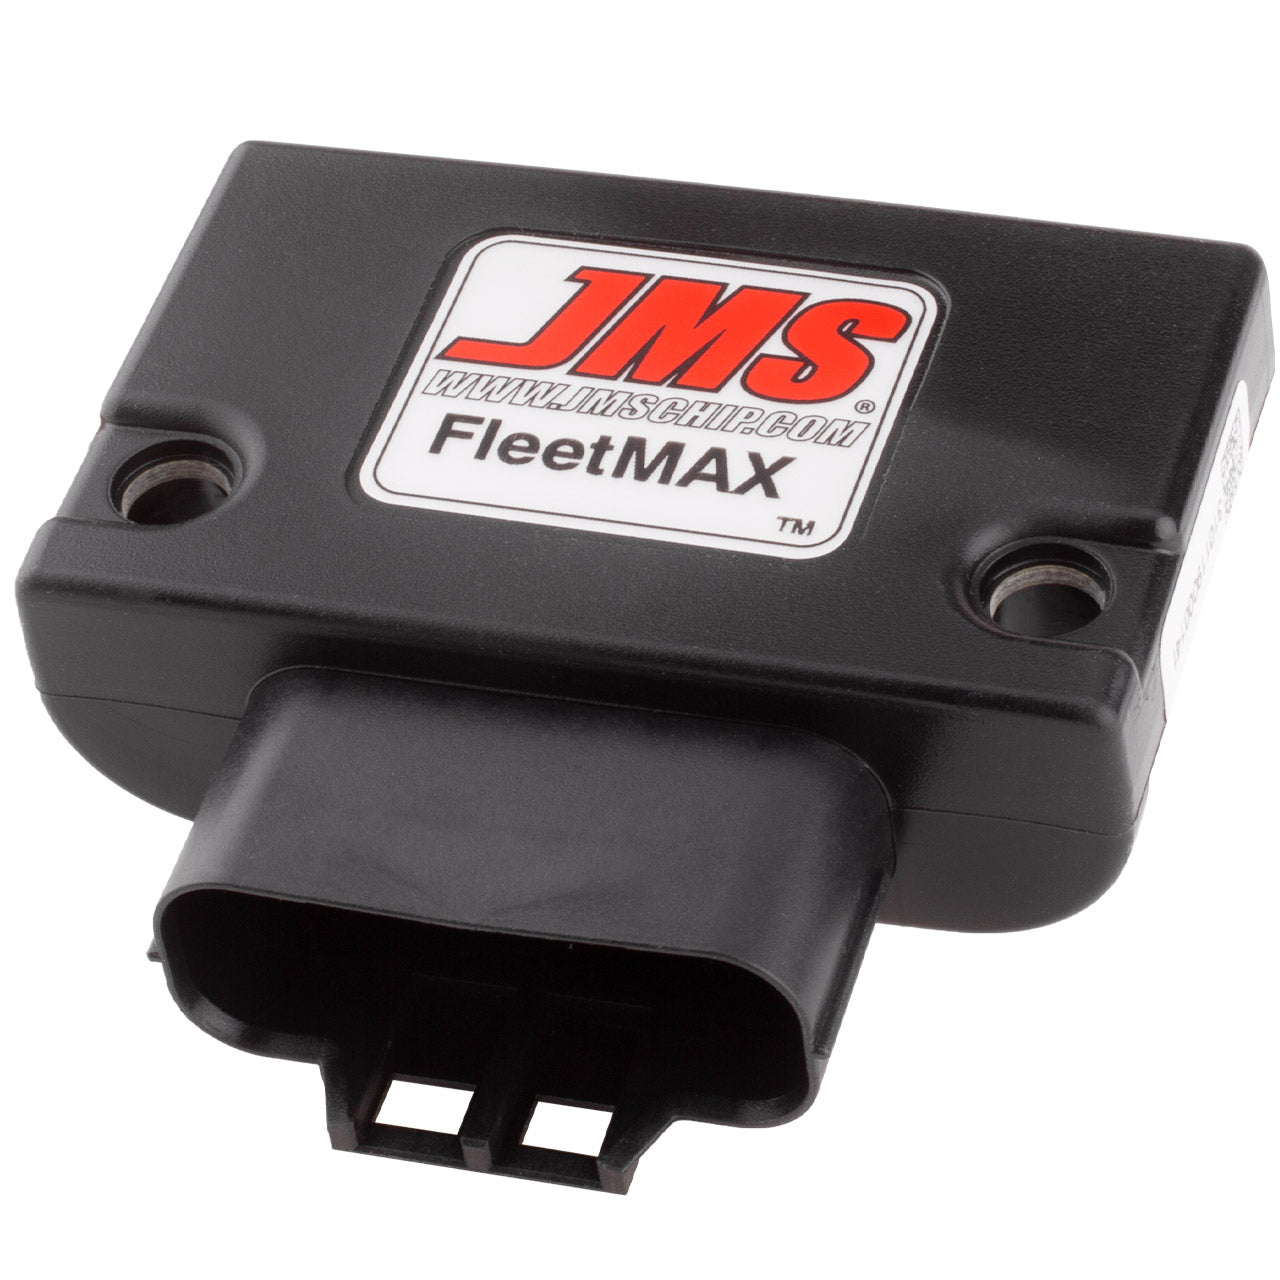 JMS FleetMAX Speed Control Device. Plug and Play for some 2013 - 2021 Nissan Vehicles with electronic throttle control FX71219NSV2